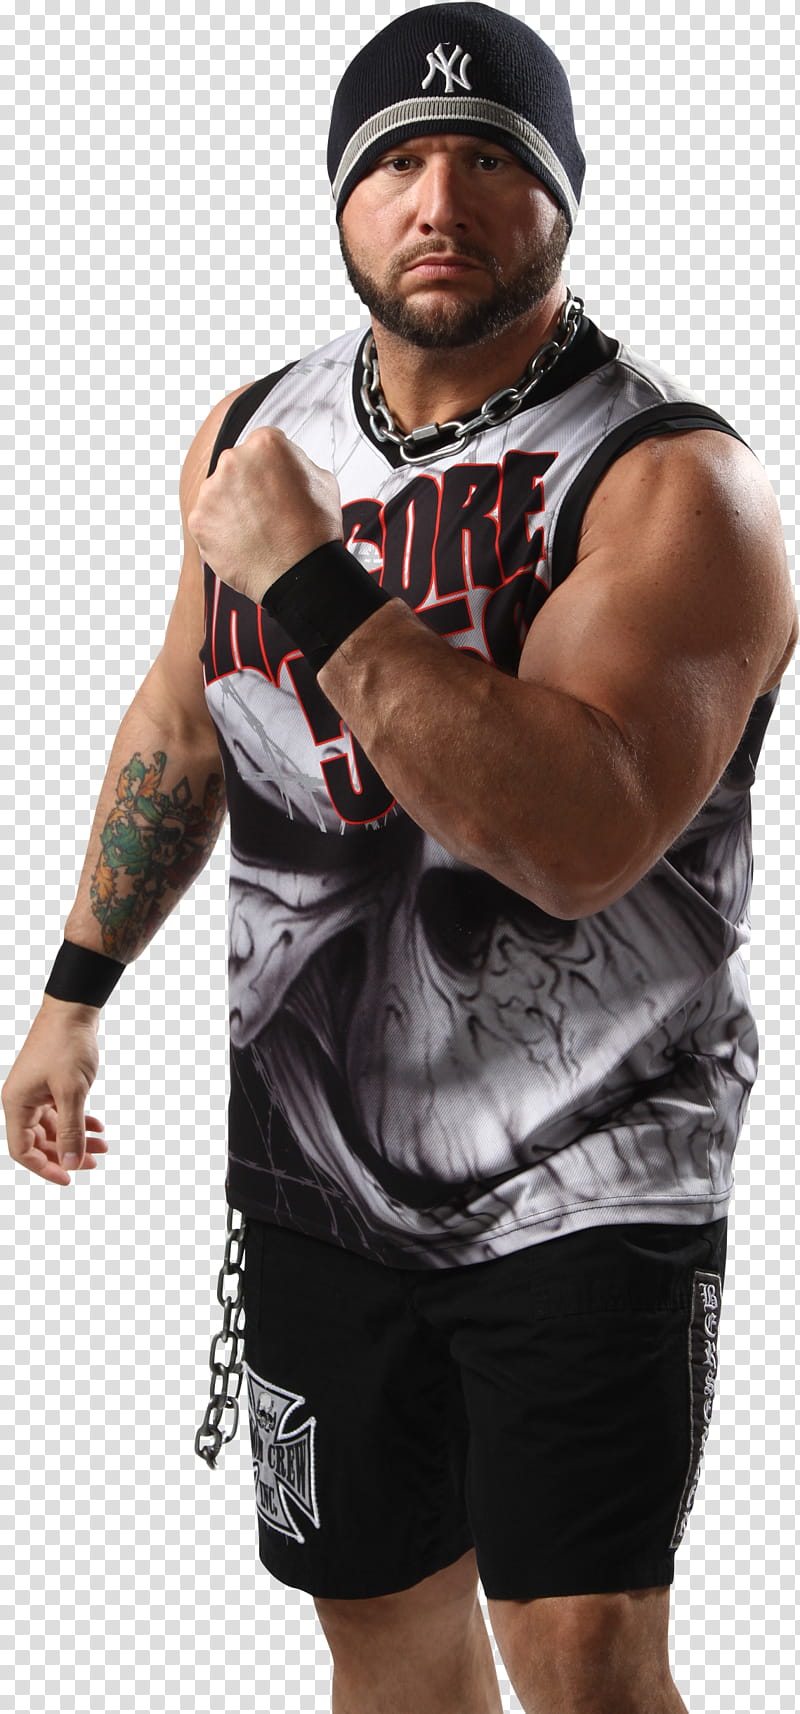 Bully Ray TNA transparent background PNG clipart.